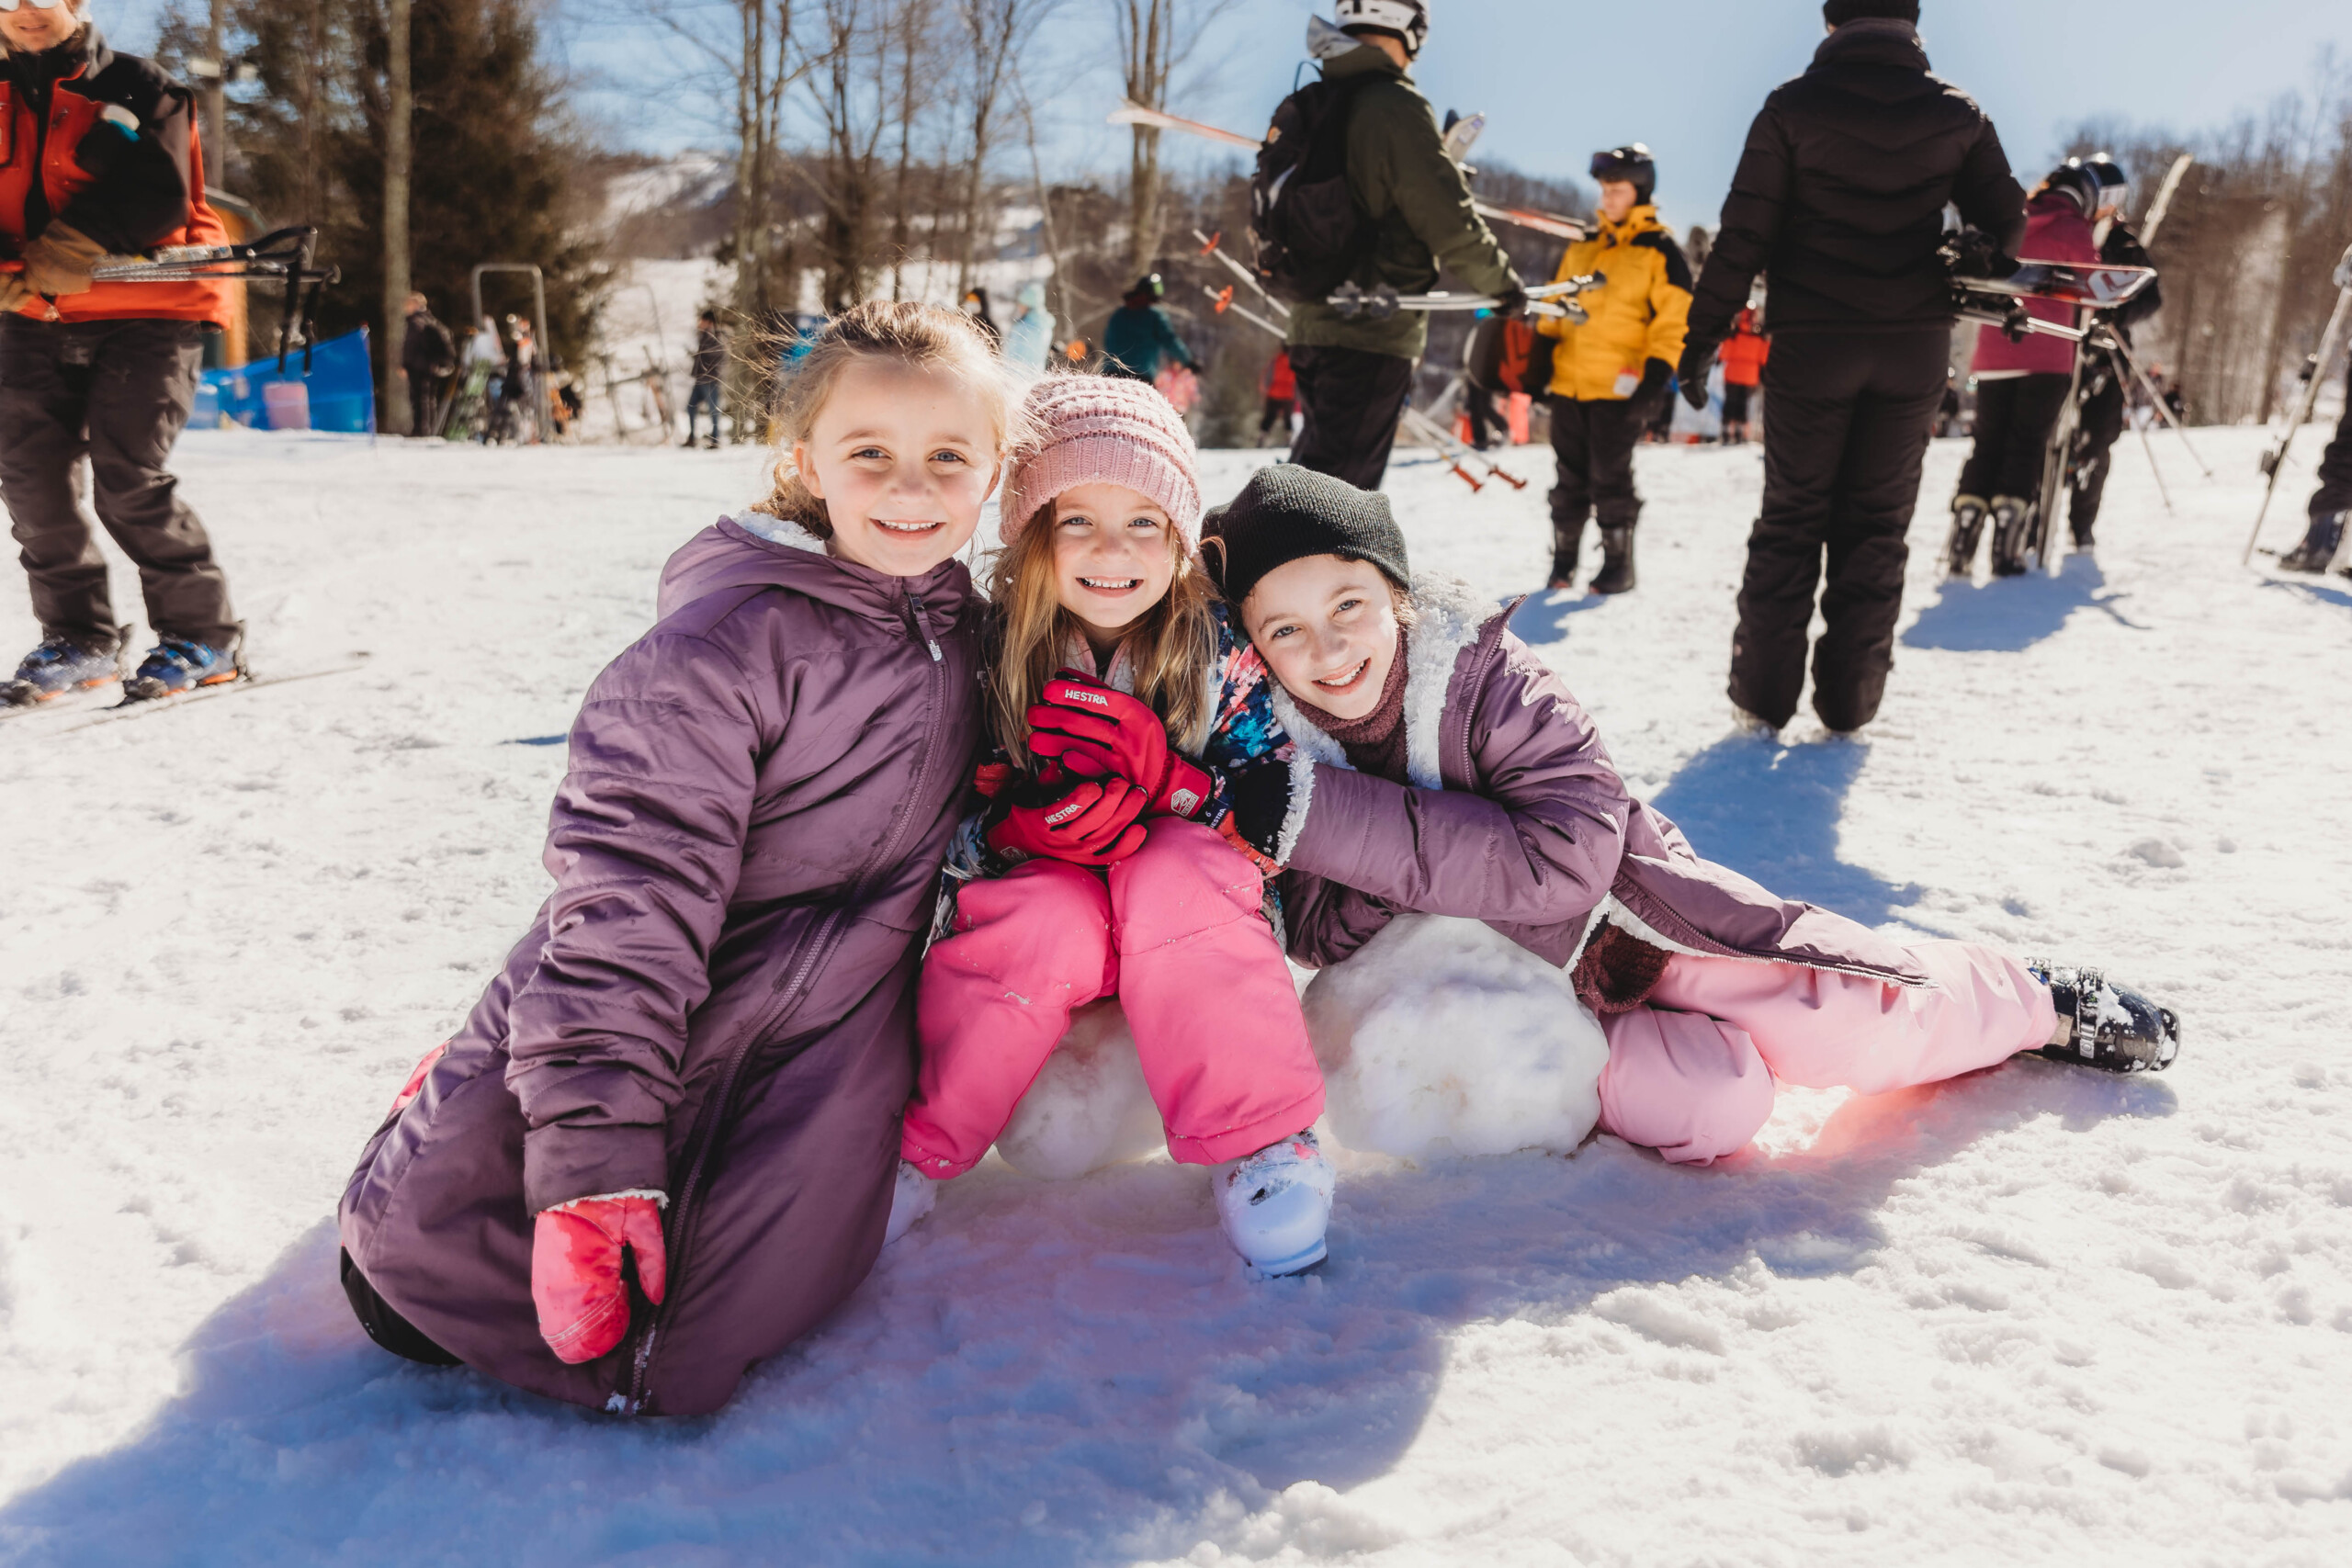 CHARLOTTE PARENT – Winterplace: A Mountain of Fun